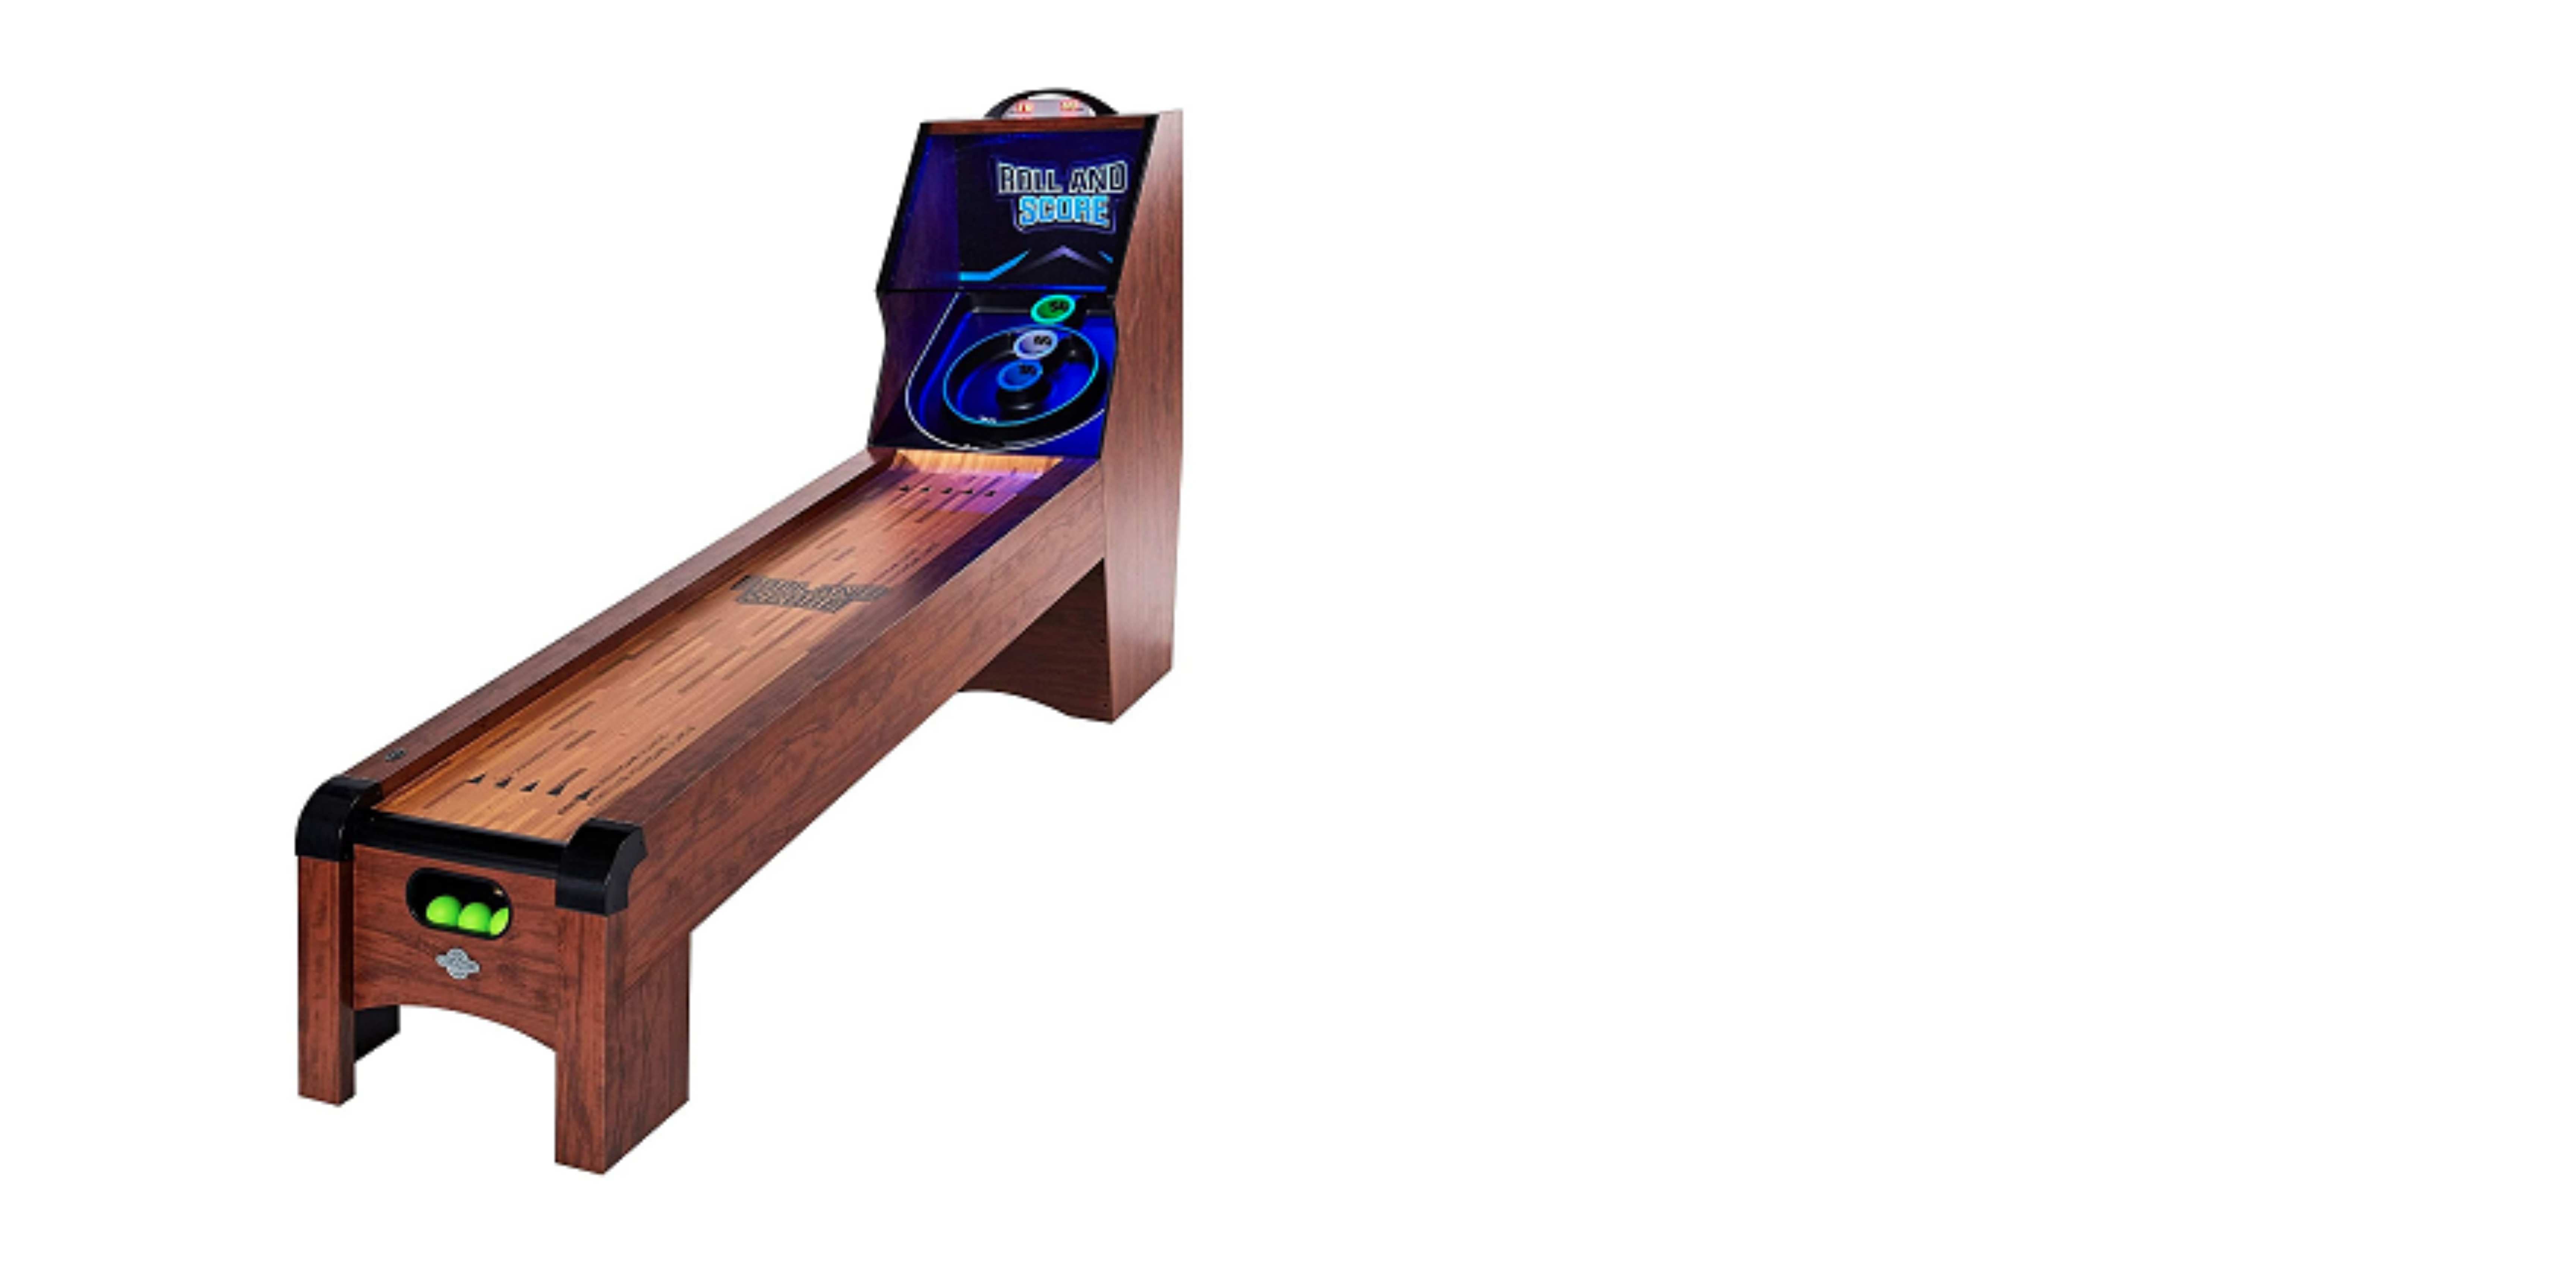 A classic skee ball machine with durable materials and a wood design finish